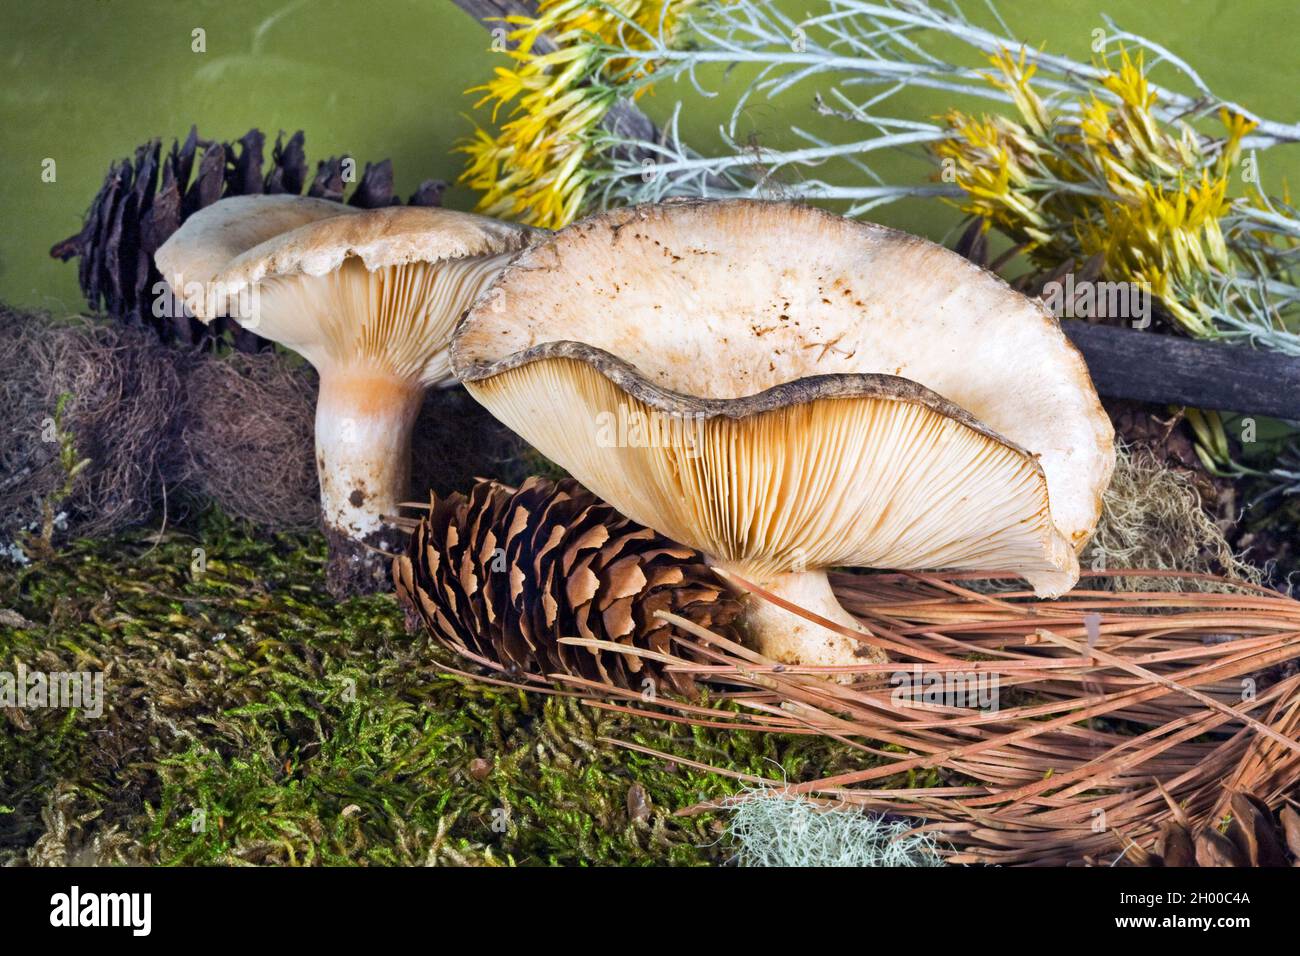 Detail of a milky cap mushroom, Lactarius glyciosmus, growing in a forest in central Oregon. Stock Photo